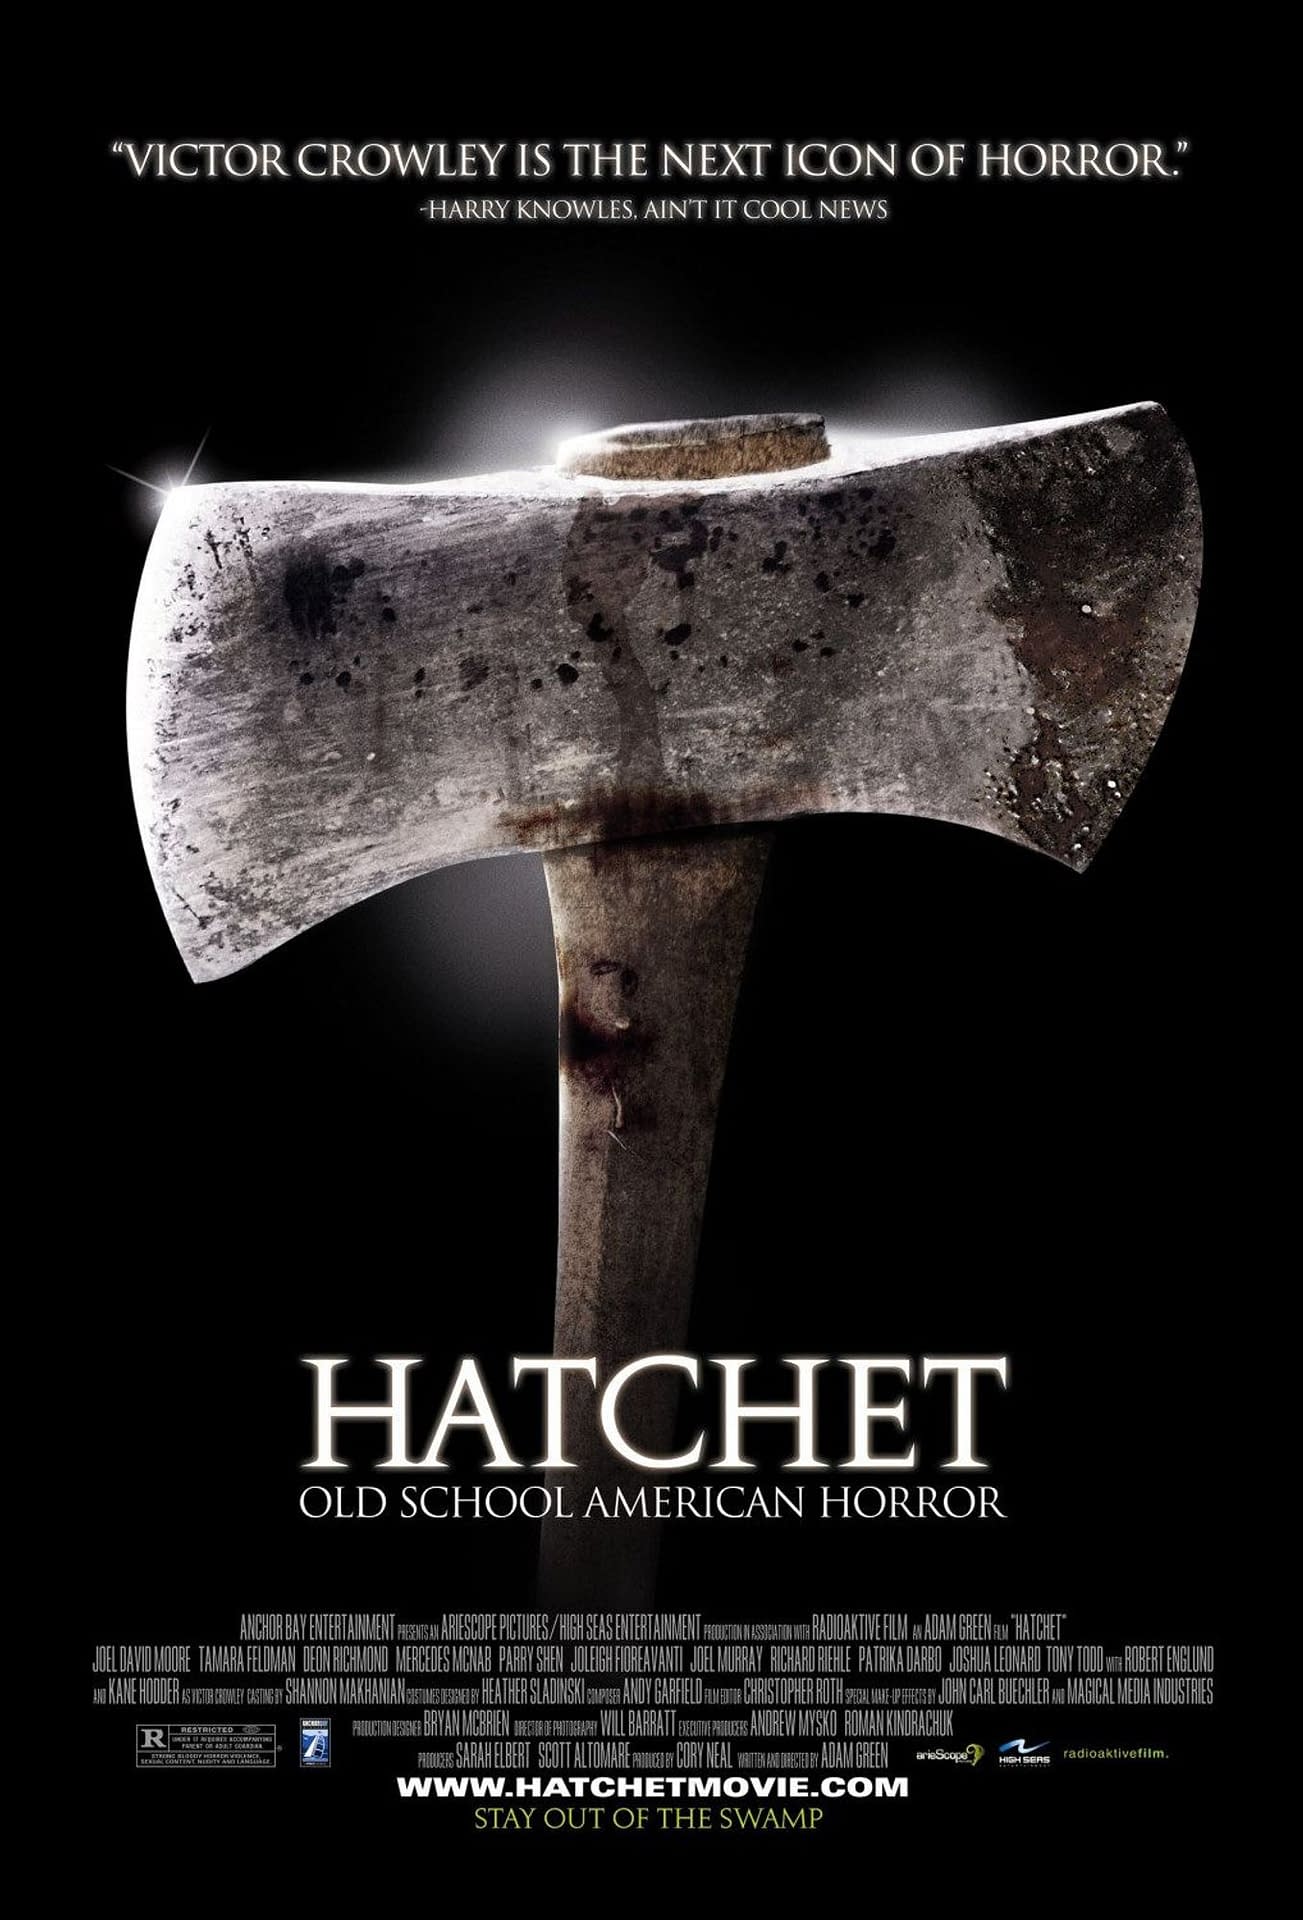 "Hatchet" Star Danielle Harris Suggests More Sequels Are Coming